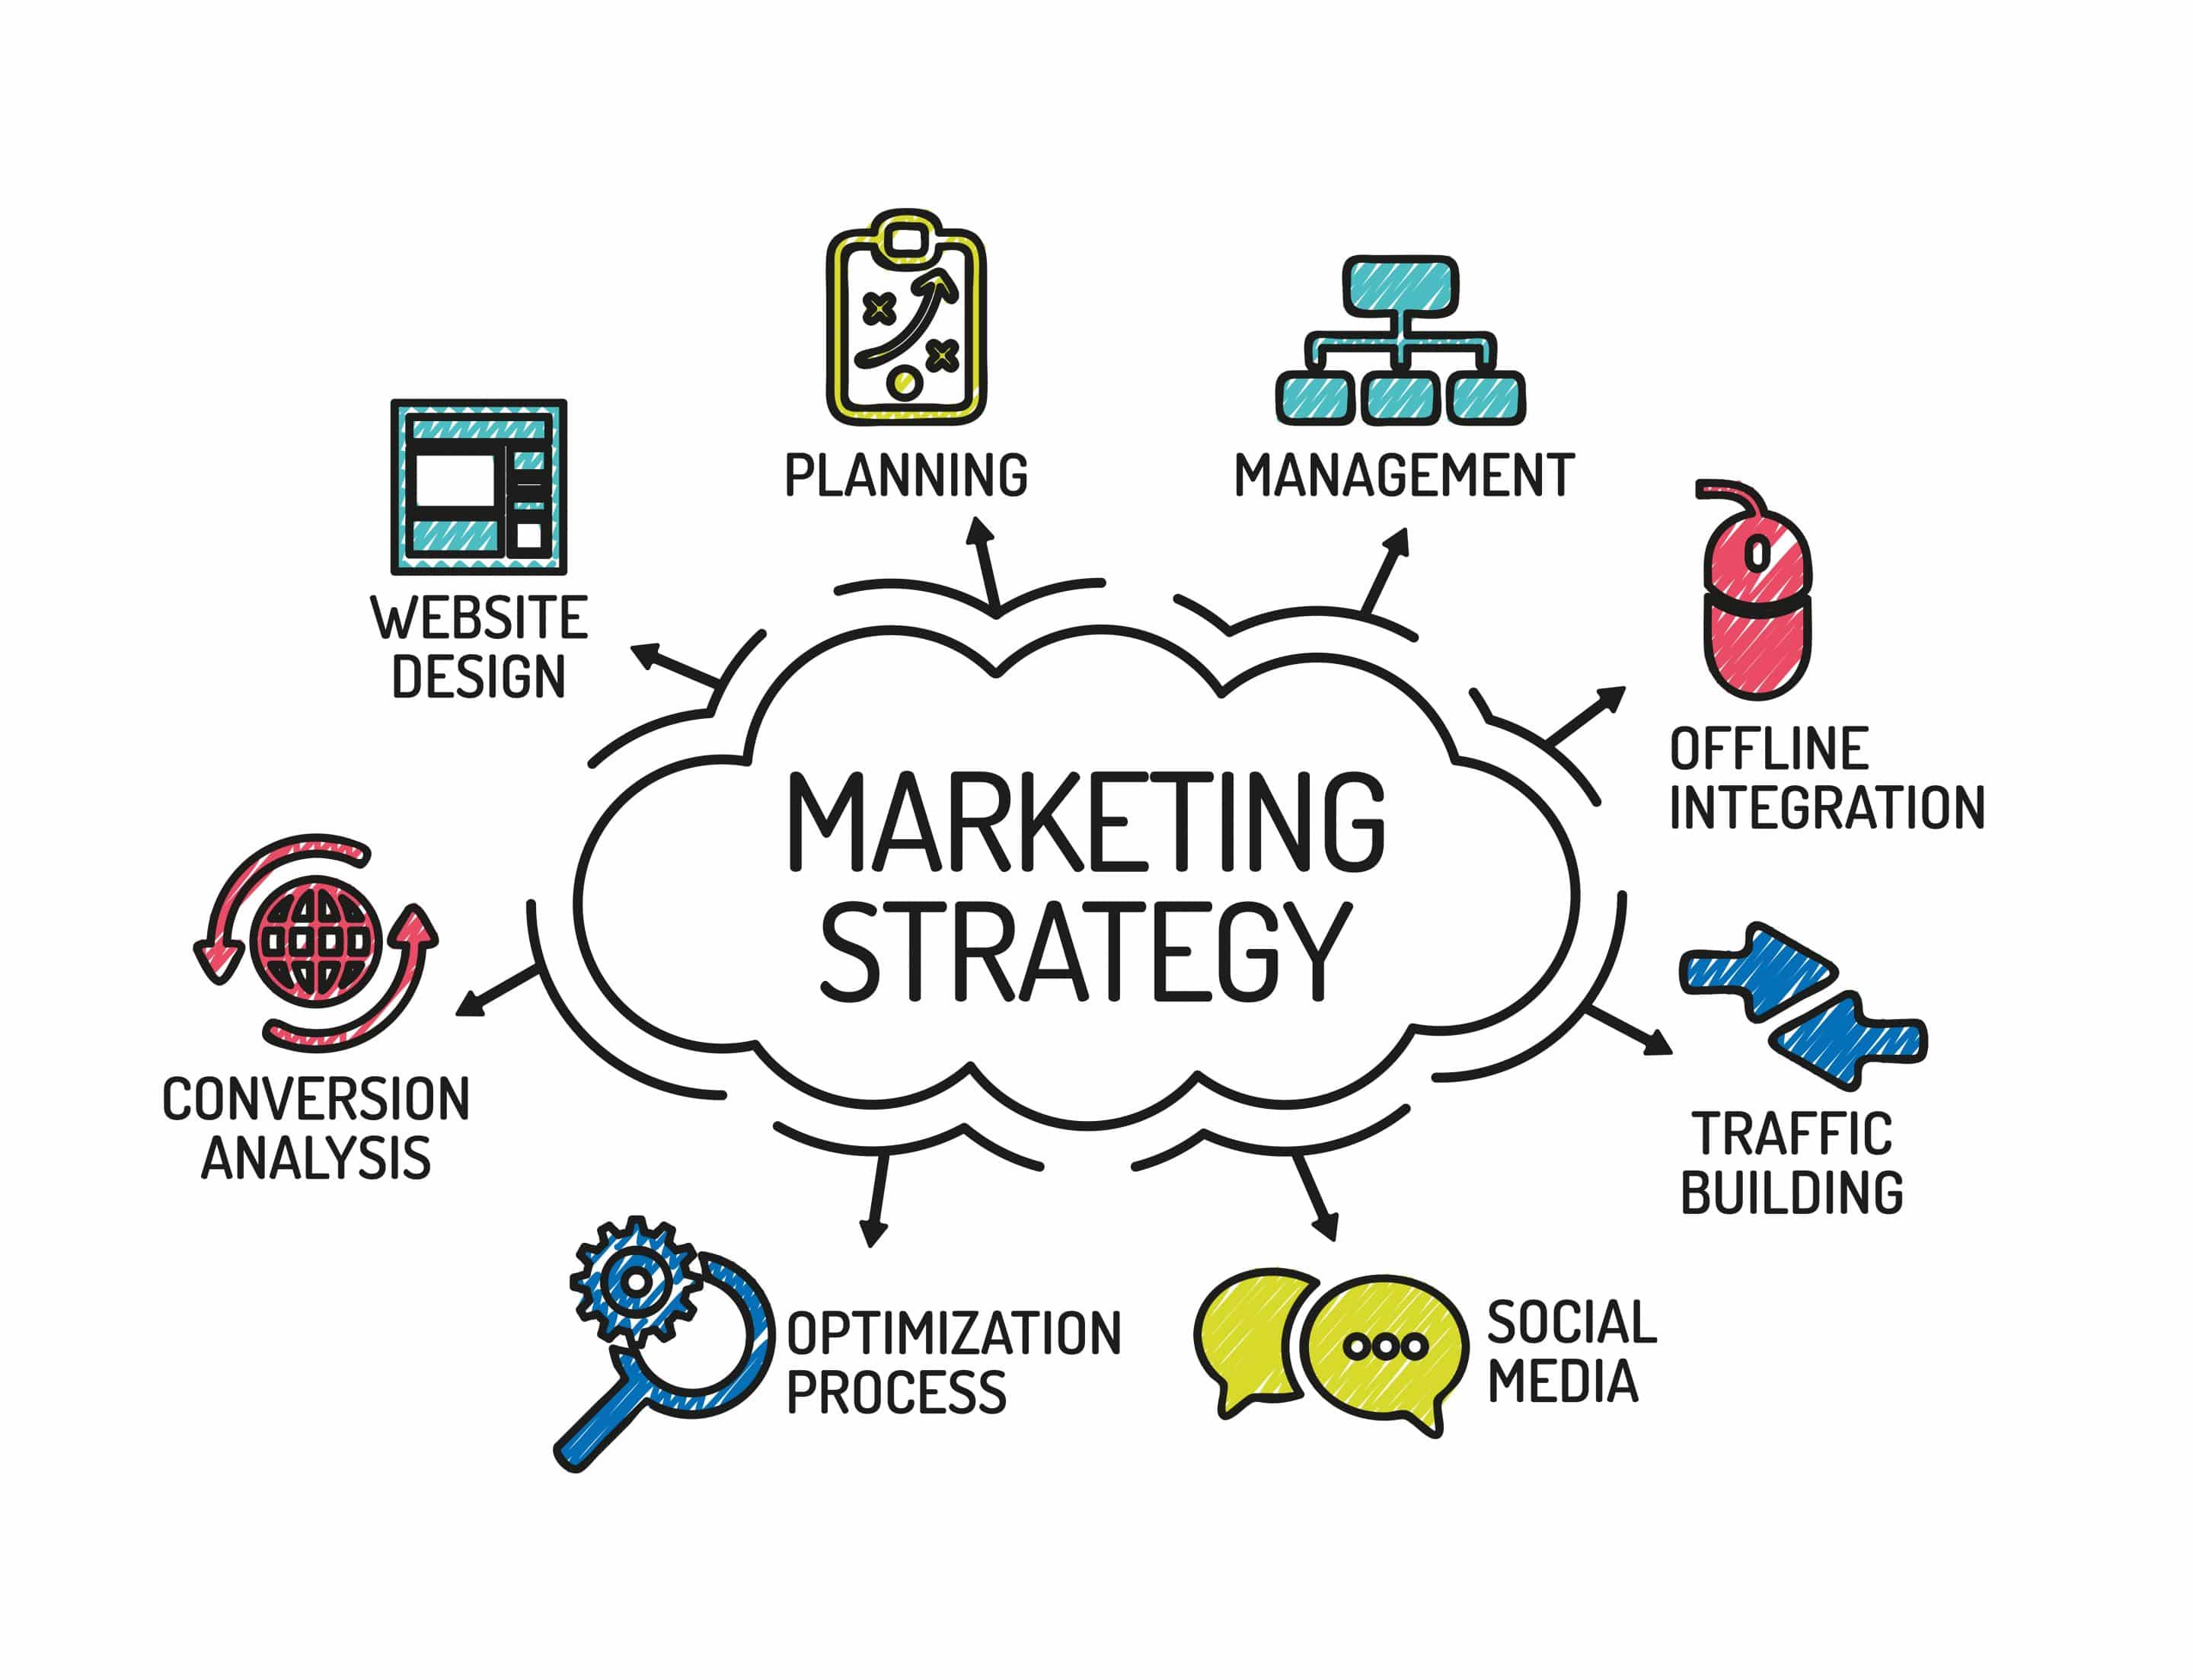 business growth marketing strategy